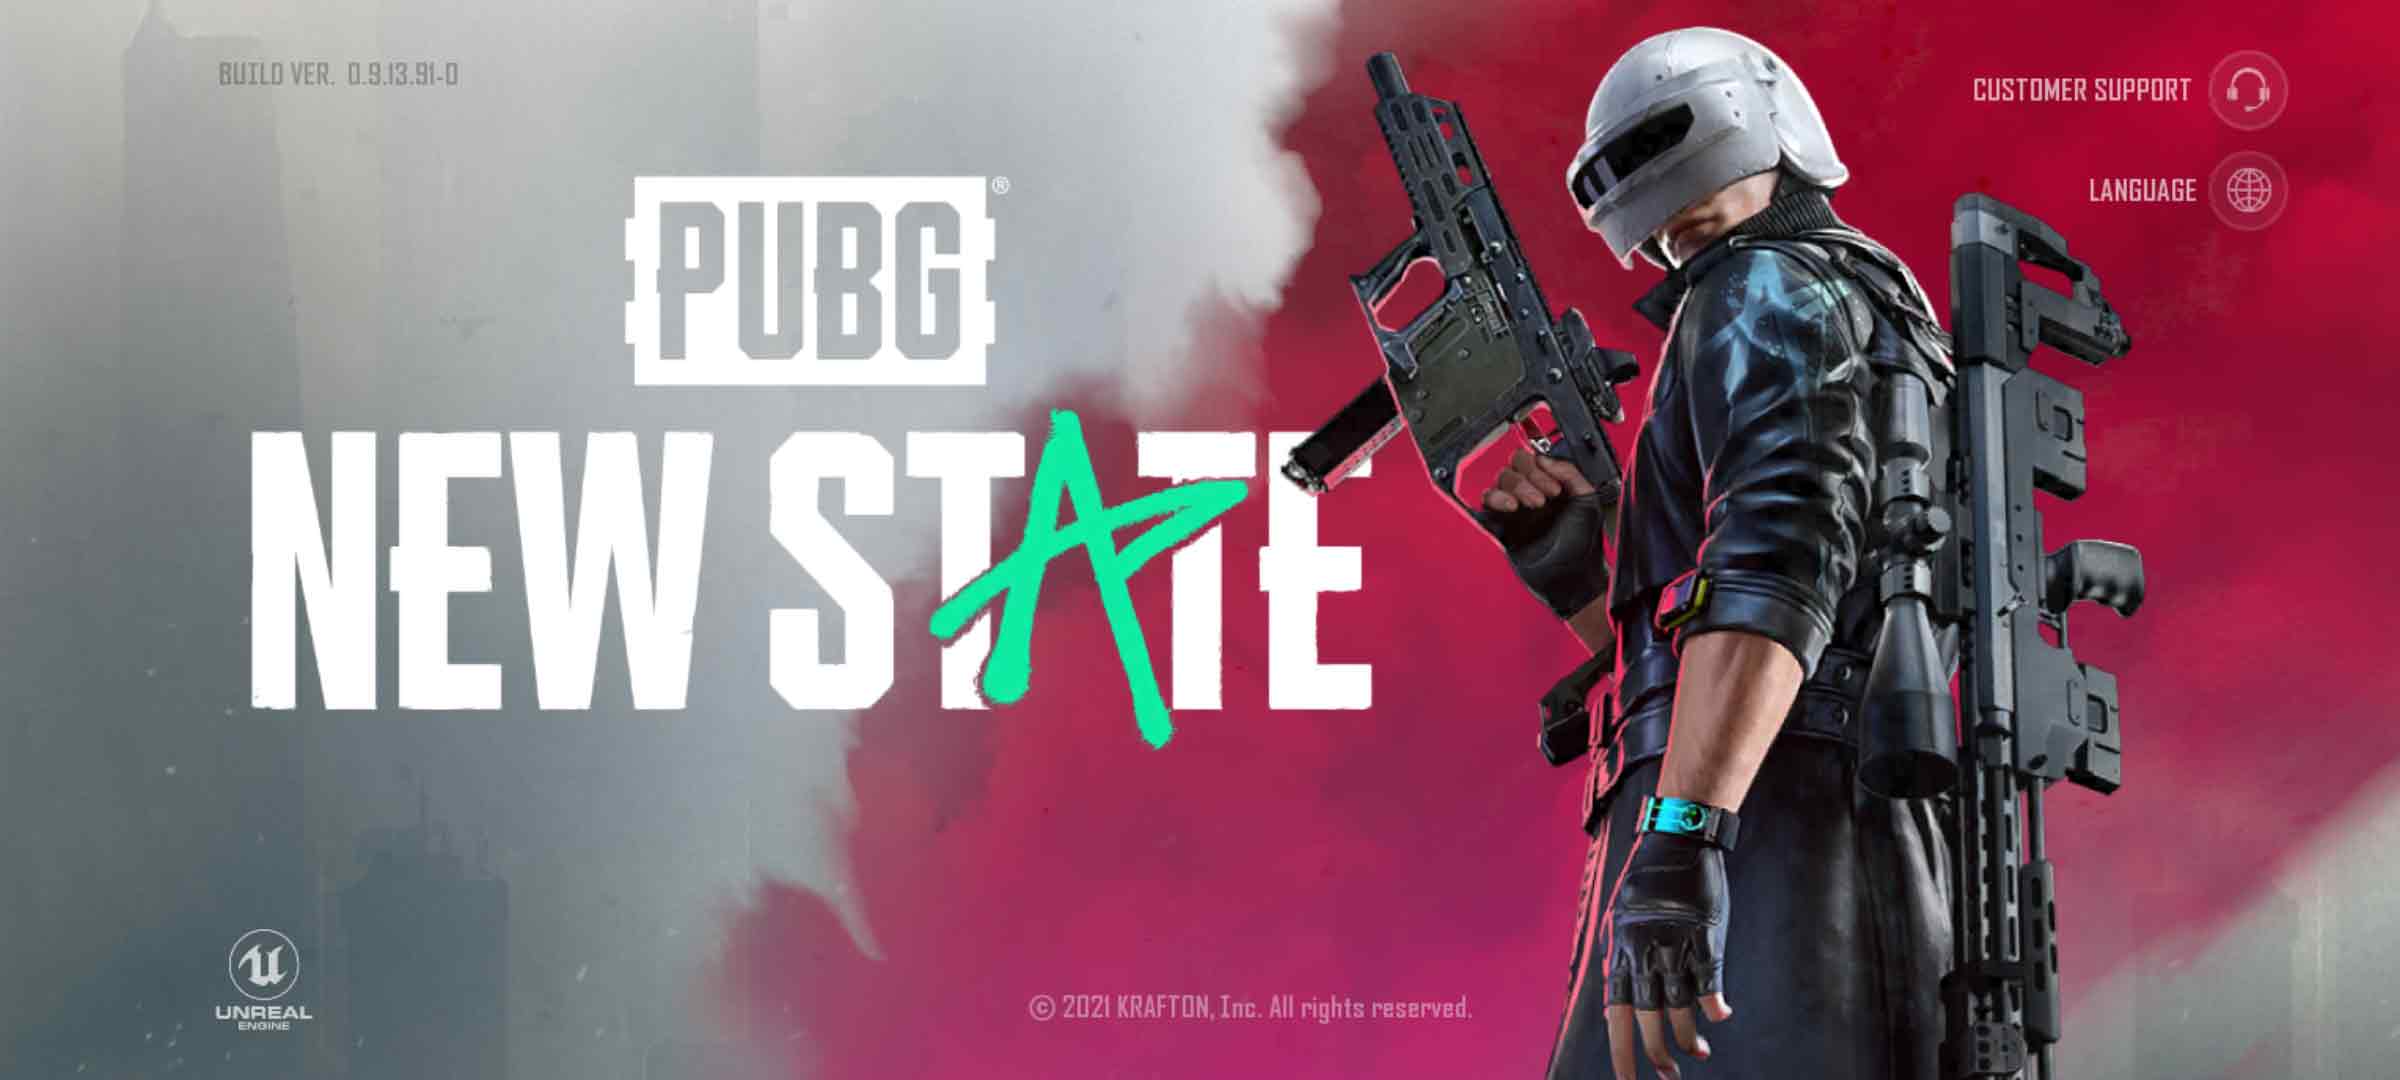 PUBG New State ALPHA Early Access v0.9.13.91 Released – Download APK + OBB